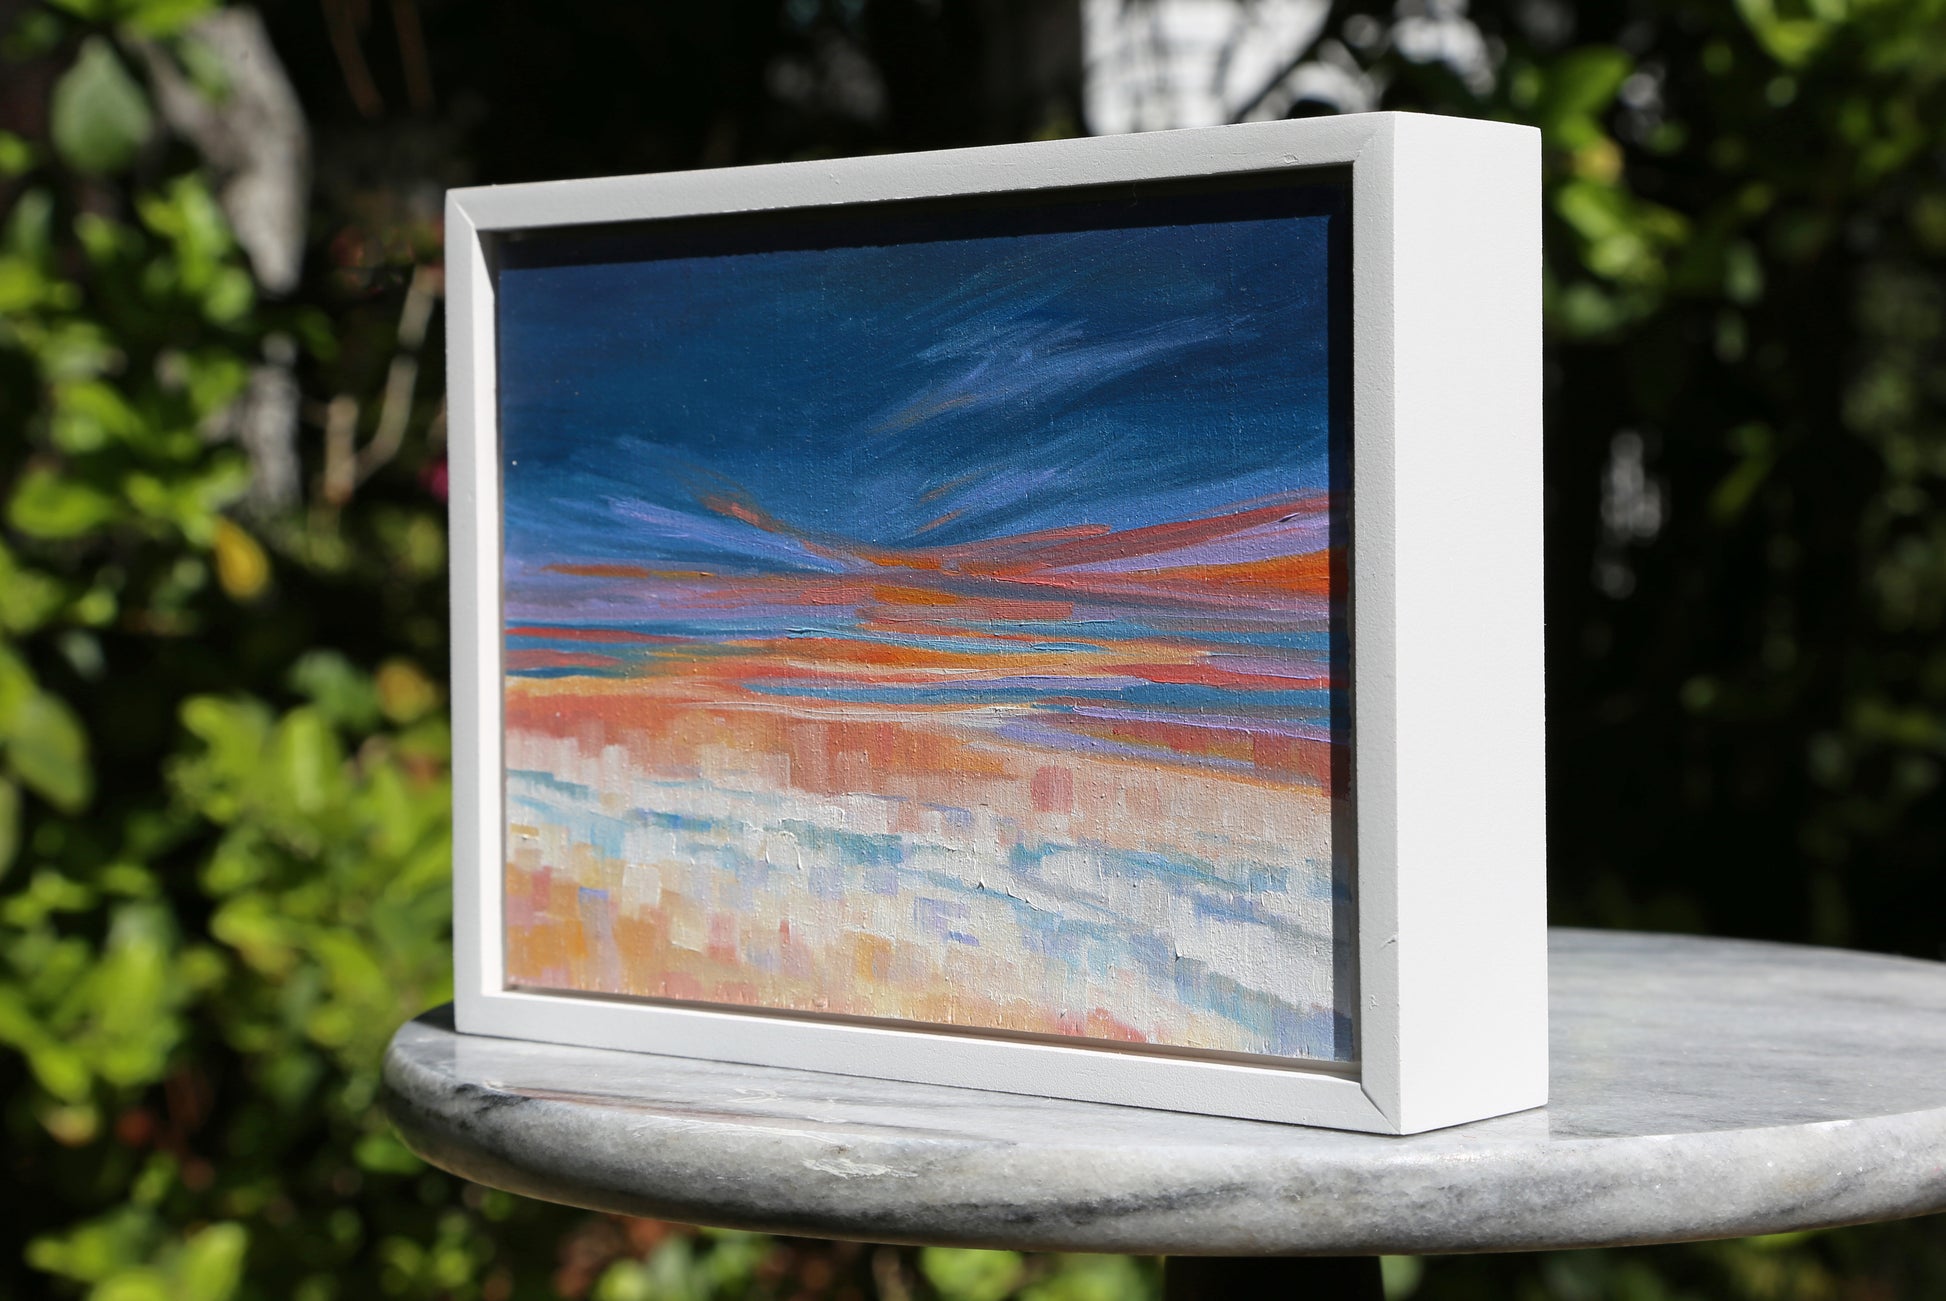 As Far offers a stunning addition to any home decor with its abstract original oil painting in bright sunset colors. Ready to hang in a white frame, this small yet impactful piece adds a touch of fine art to your space.